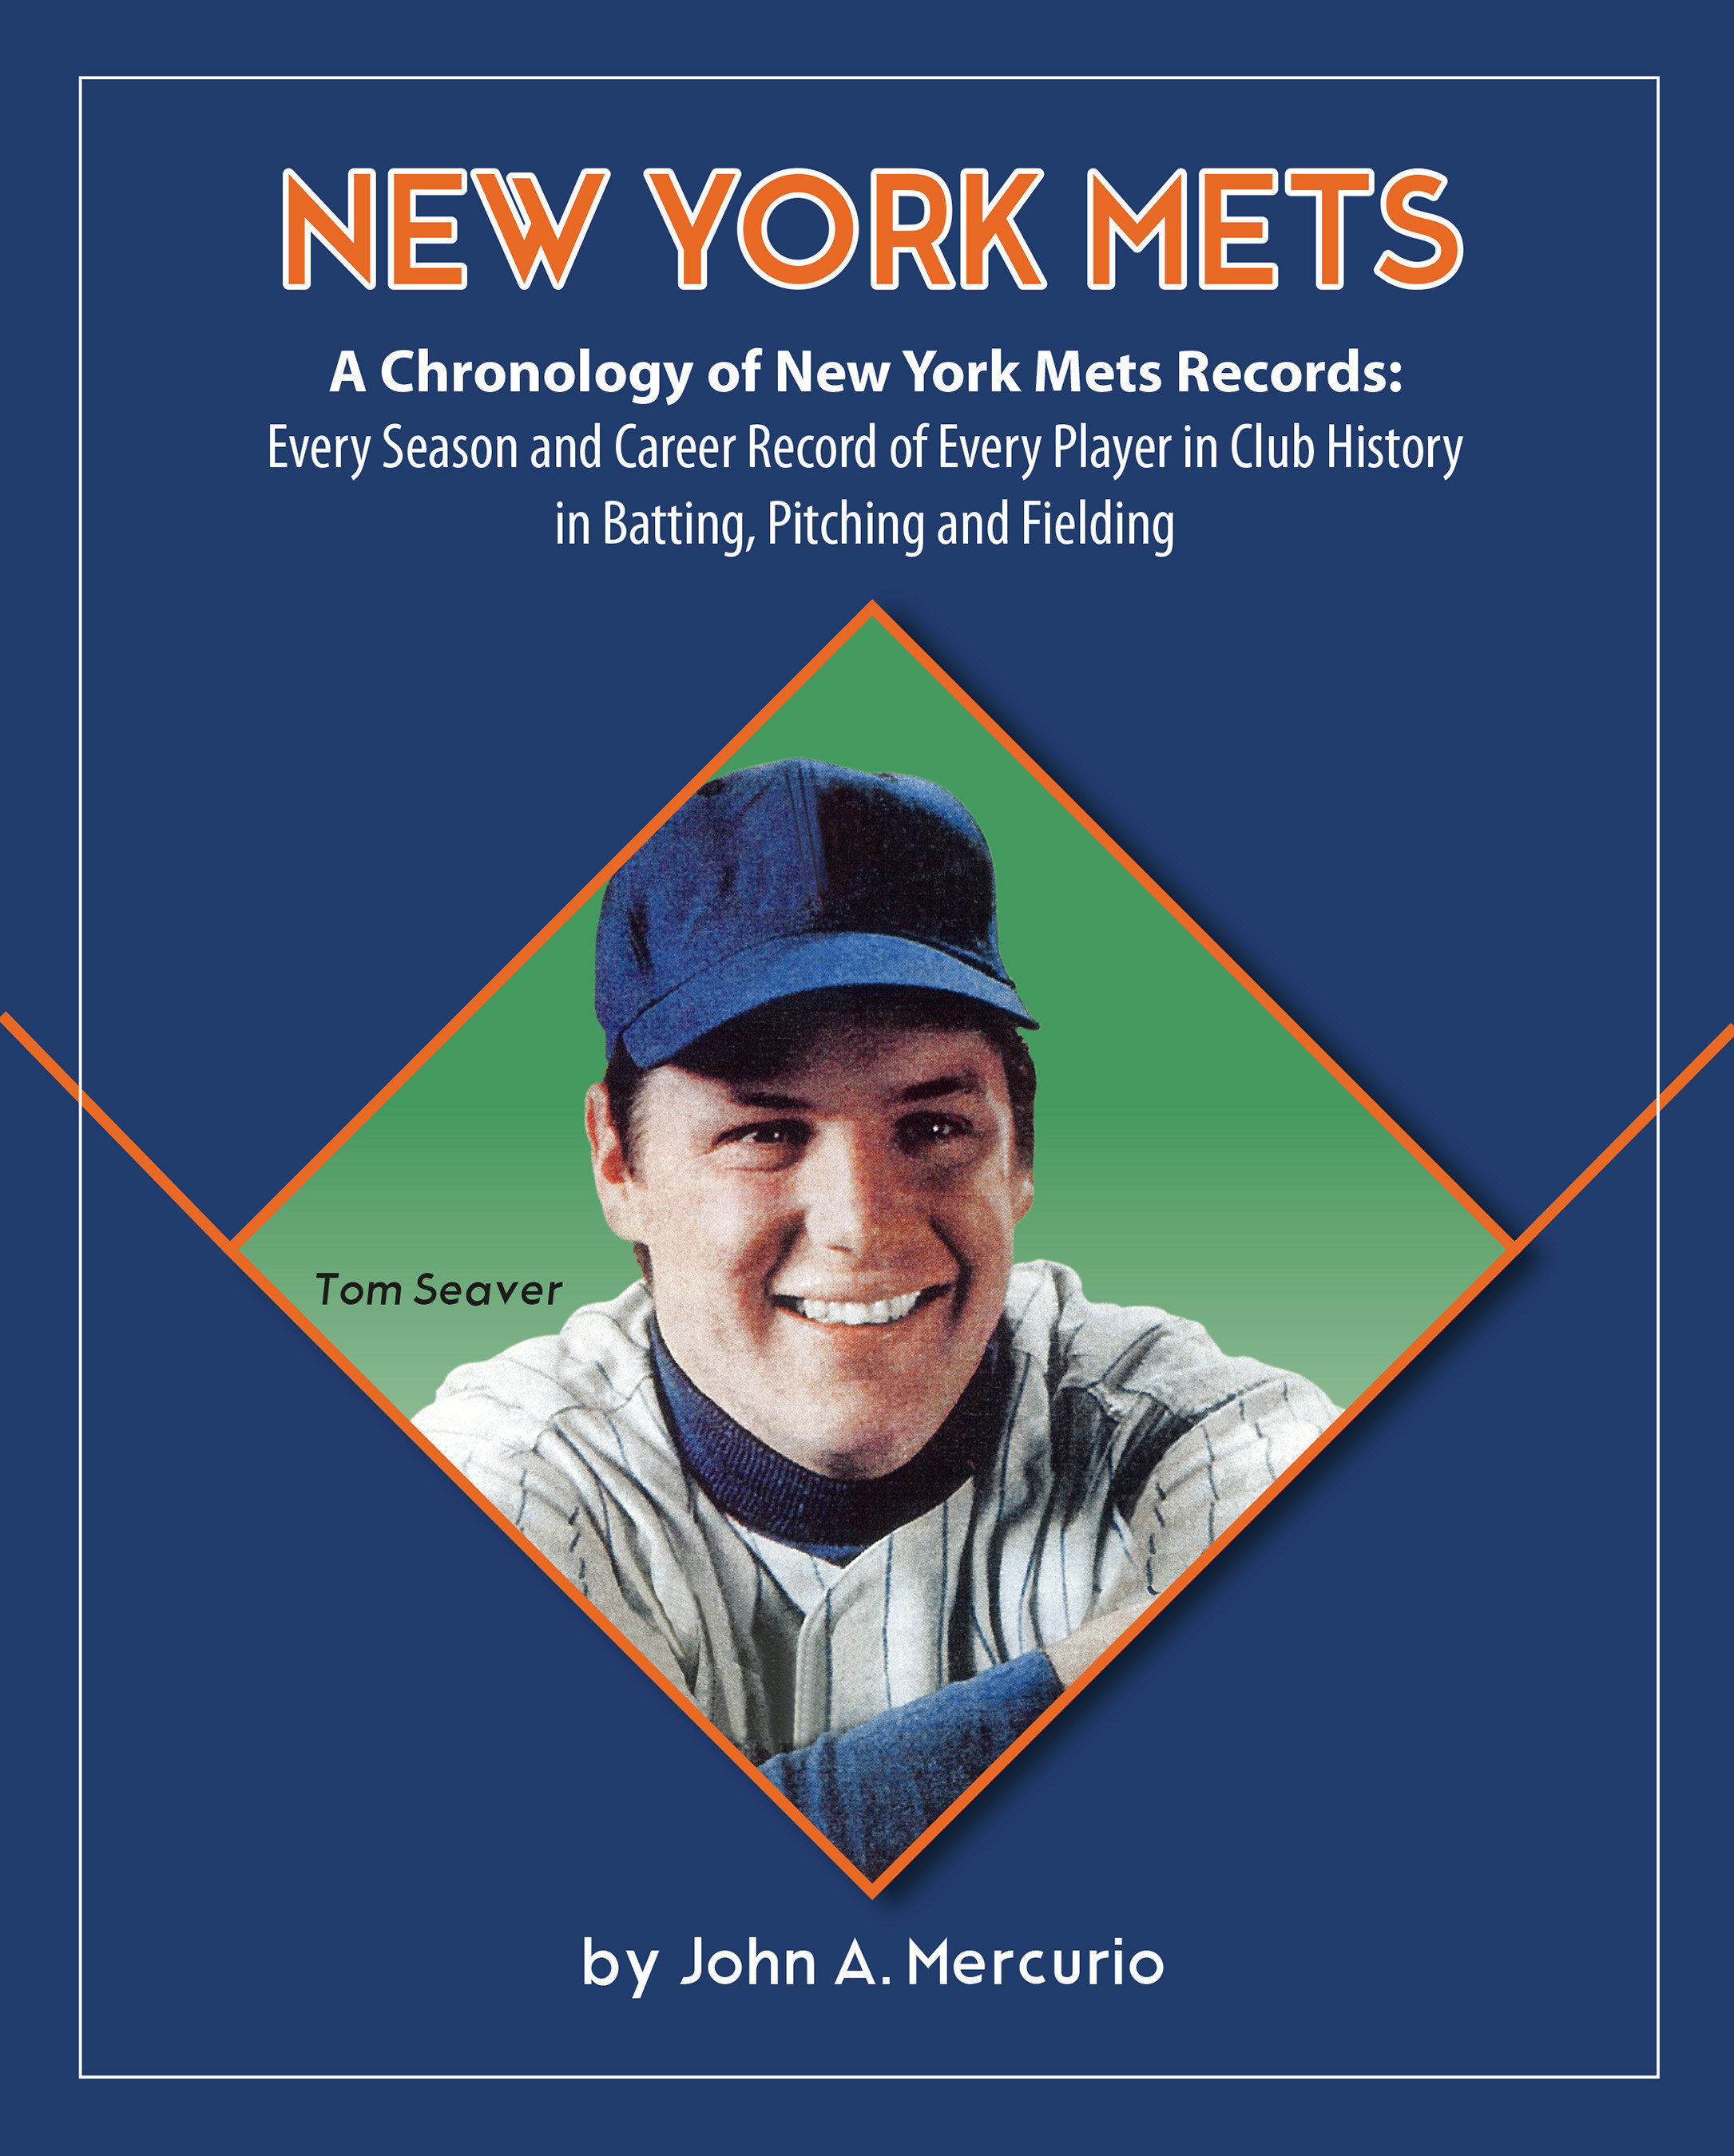 Hall of Famer Tom Seaver graces the cover of John A. Mercurio's "A Chronology of New York Mets Records." The most complete New York Mets records book ever written. Every season and career record of every player in Mets history. The John Mercurio Baseball Records Book Project, a series of 30 major league baseball team record books, are the most complete baseball record books ever written. Because Records Matter!